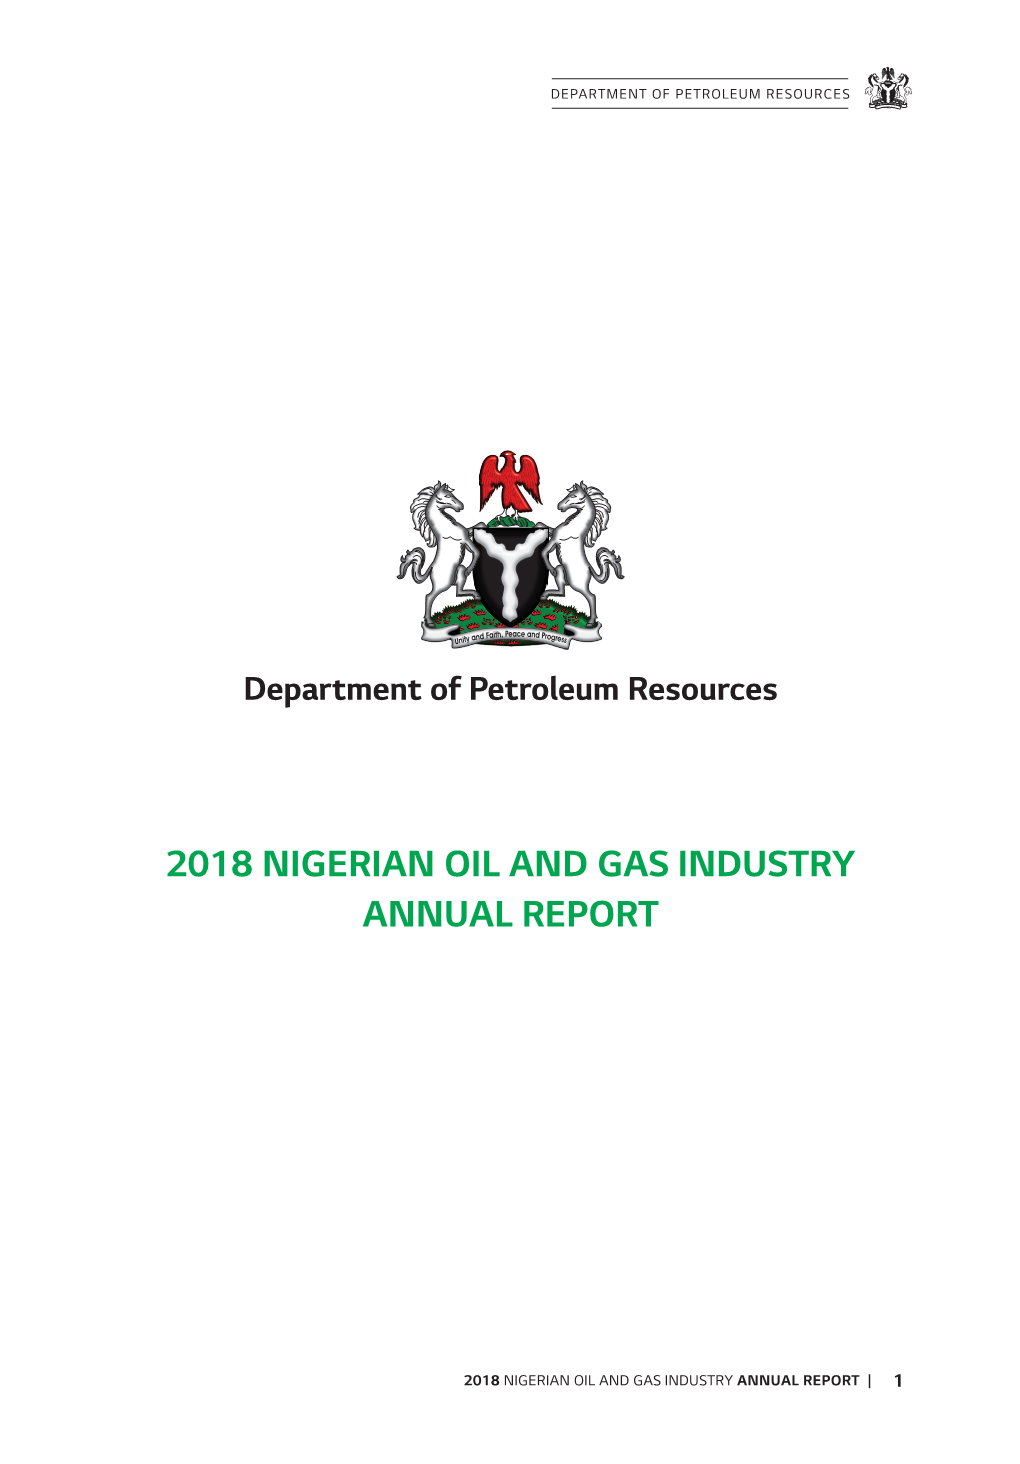 2018 Nigerian Oil and Gas Industry Annual Report